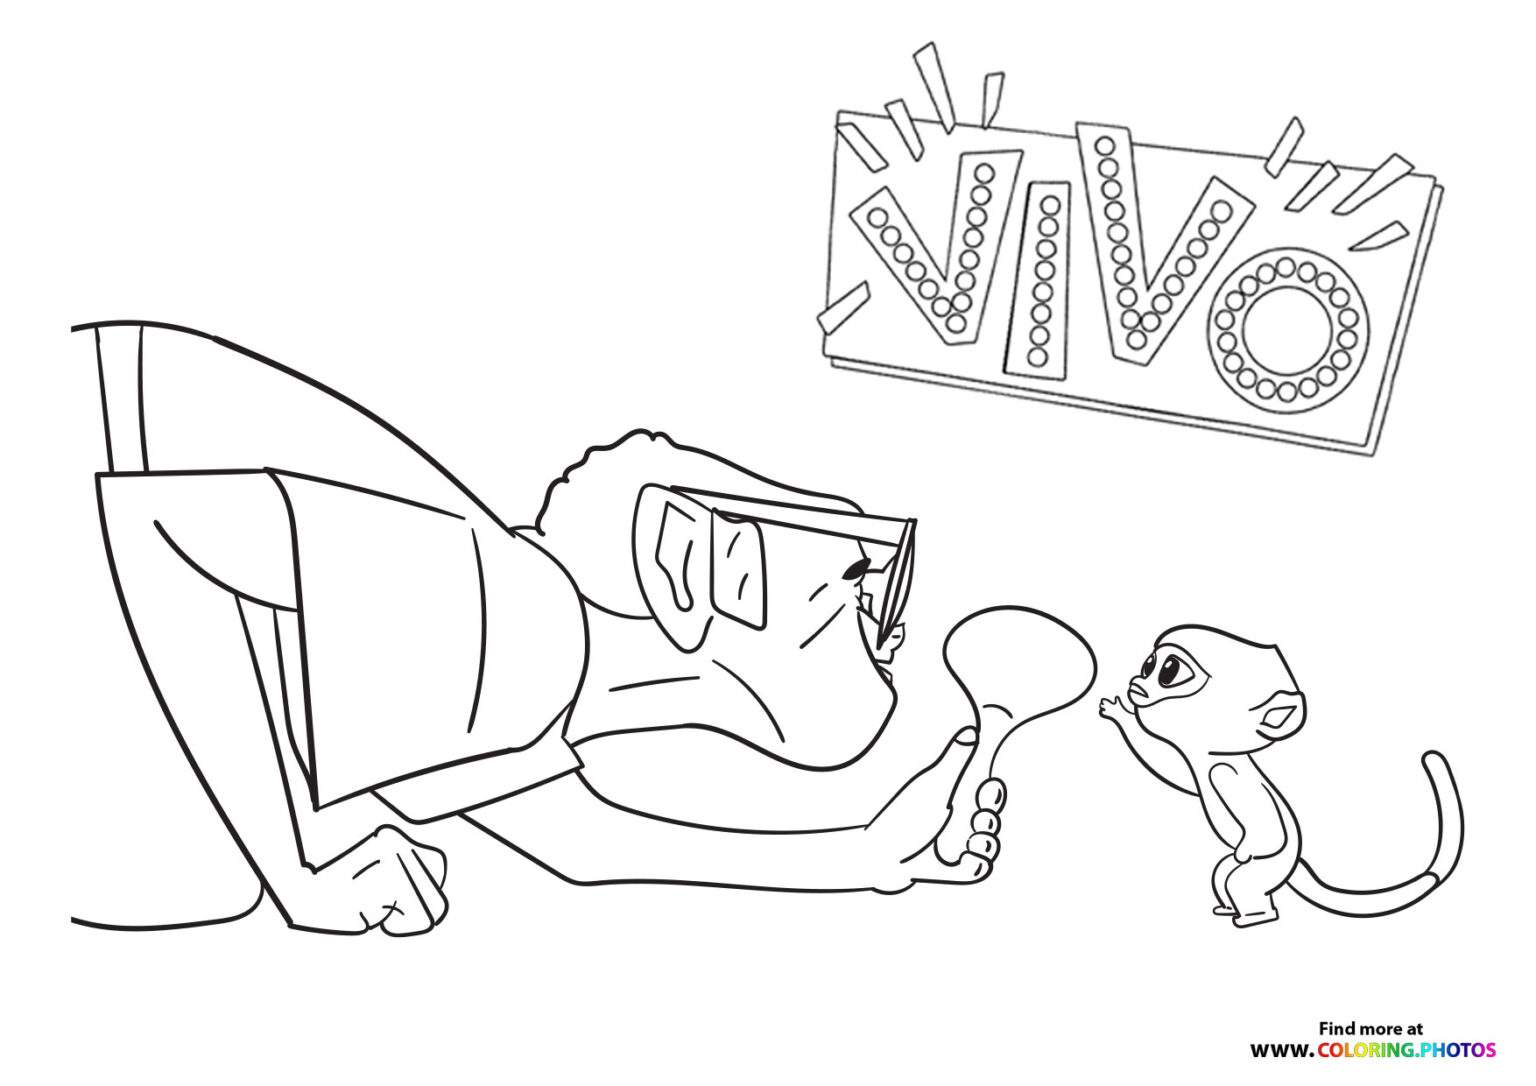 Vivo, Gabriela and Andres hanging out - Coloring Pages for kids